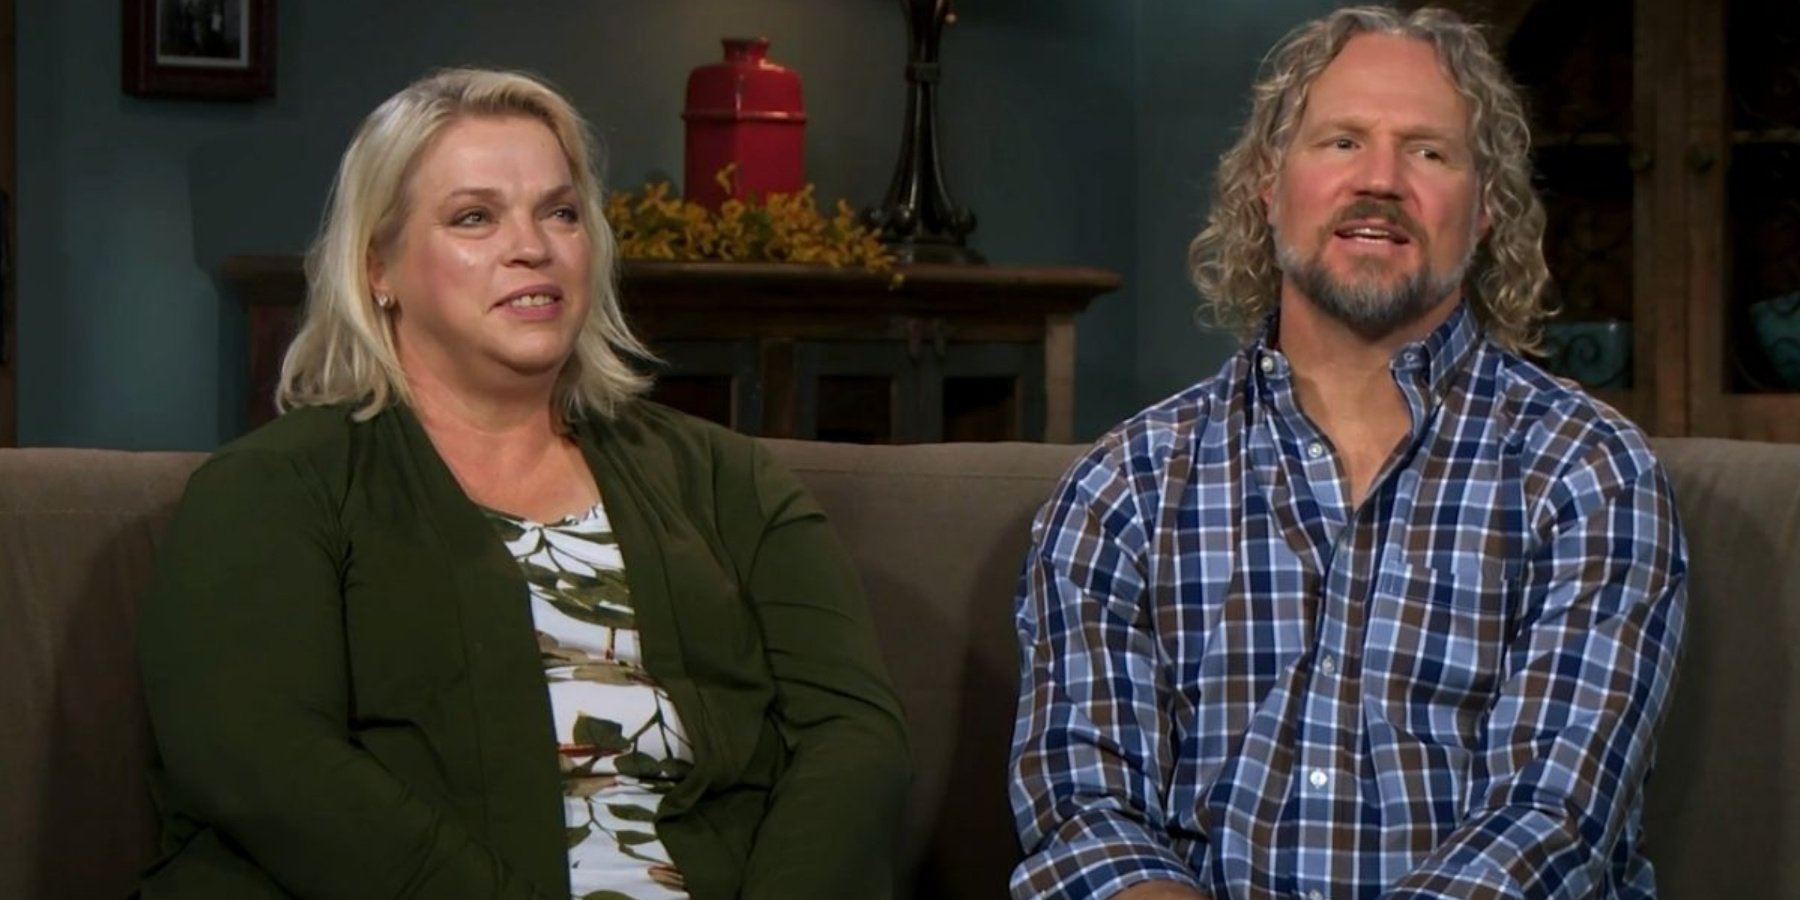 Janelle Brown and Kody Brown in a confessional for the TLC series 'Sister Wives'